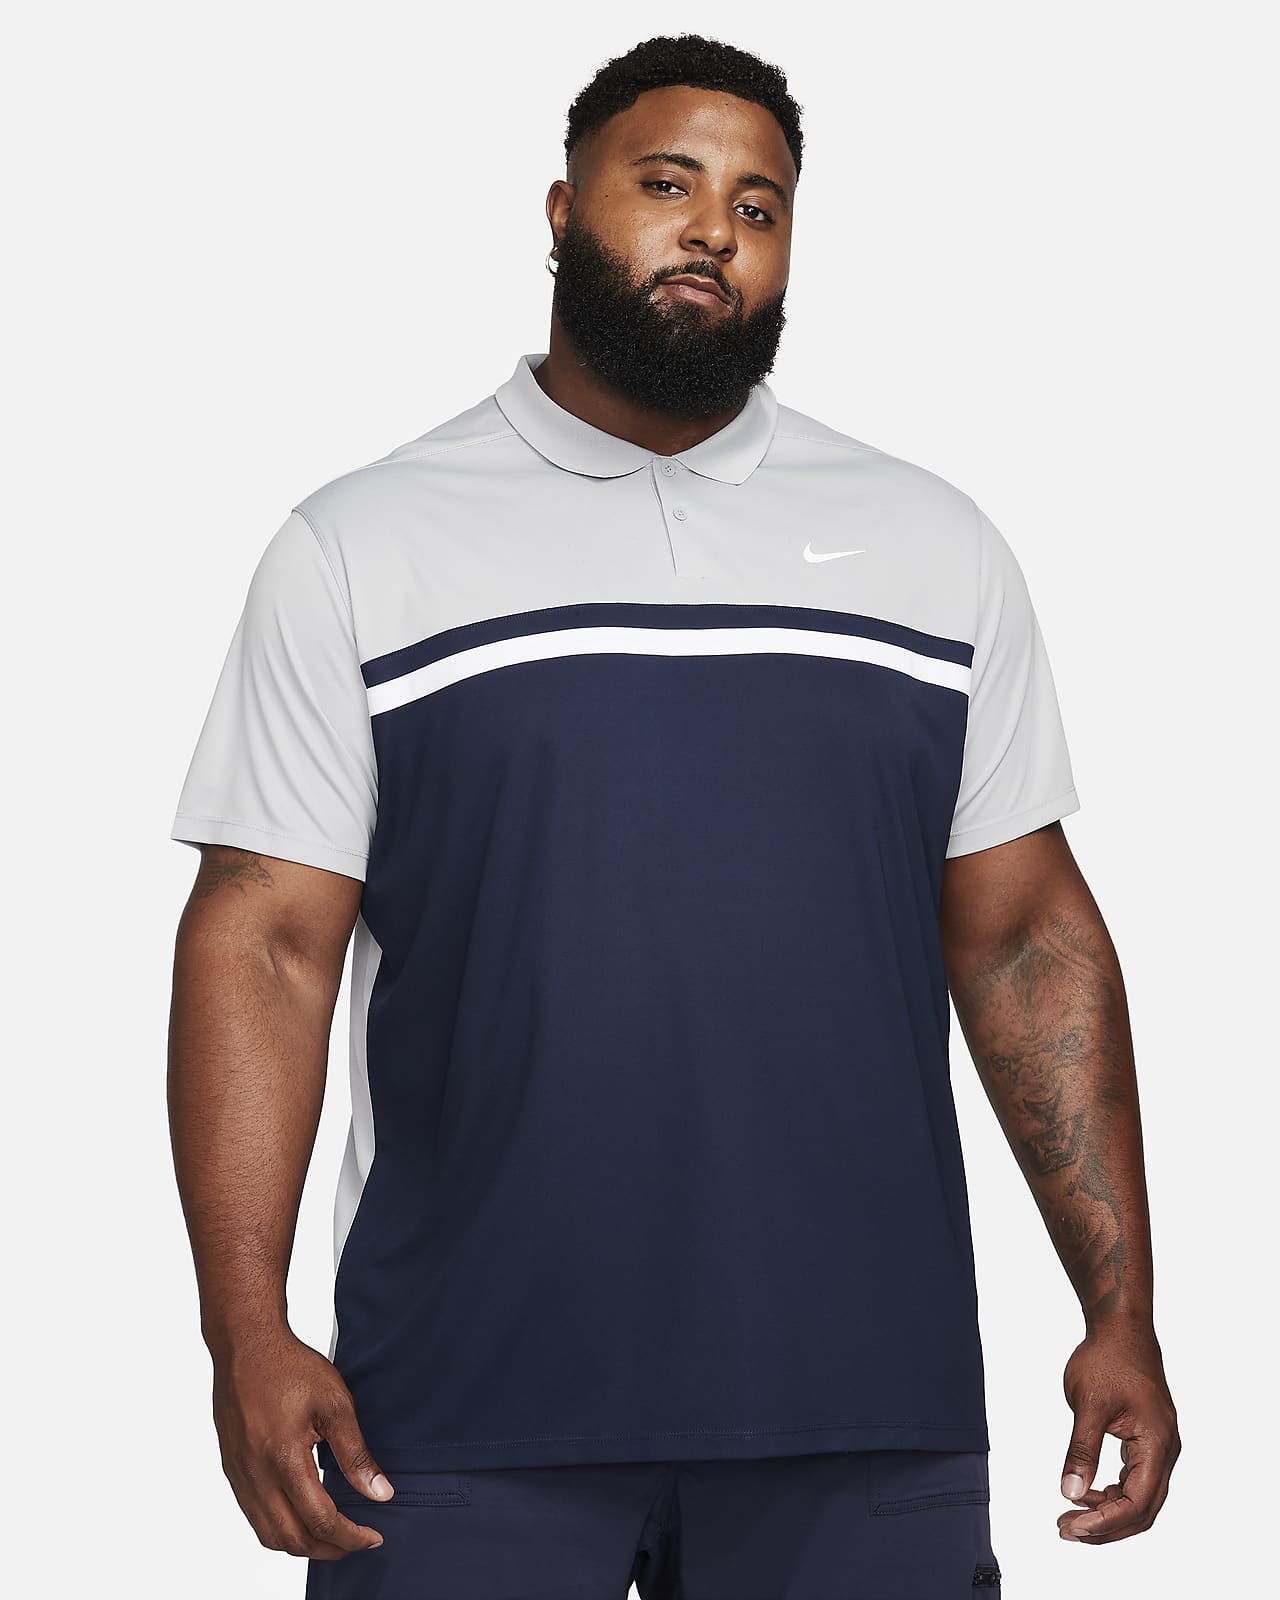 NIKE DRI-FIT VICTORY NAVY - POLO HOMME - Polo de golf NIKE - The